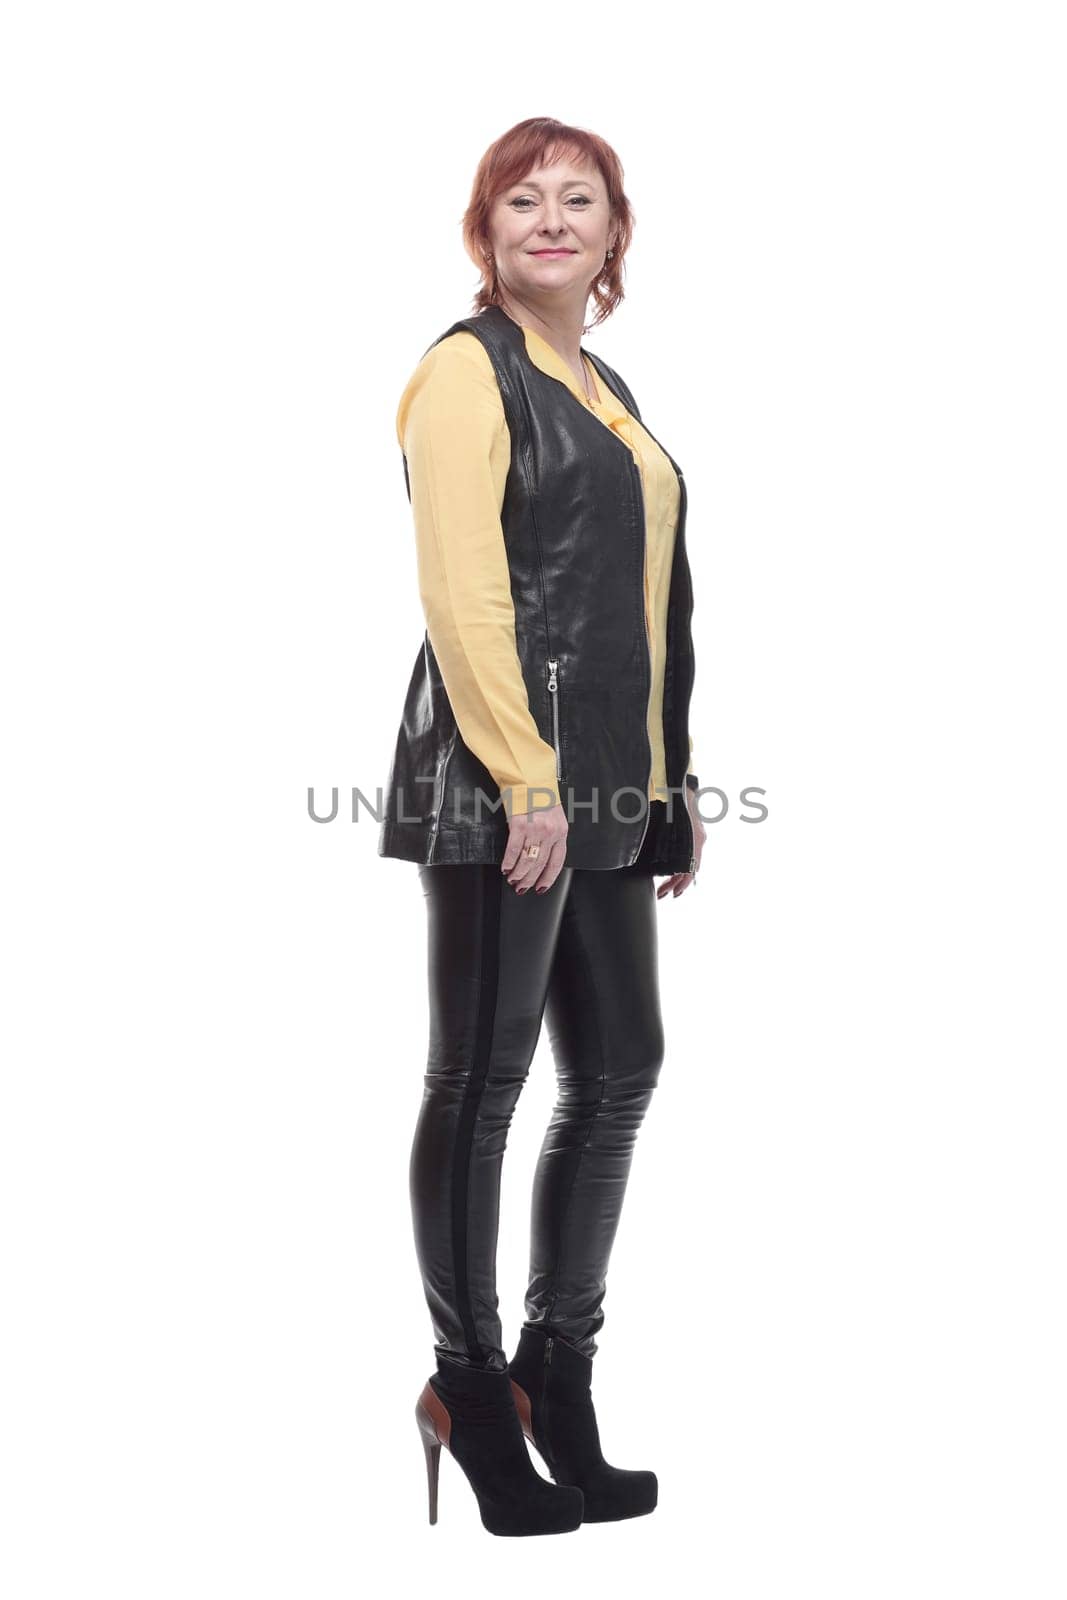 attractive mature woman in leather trousers and vest. isolated on a white background.